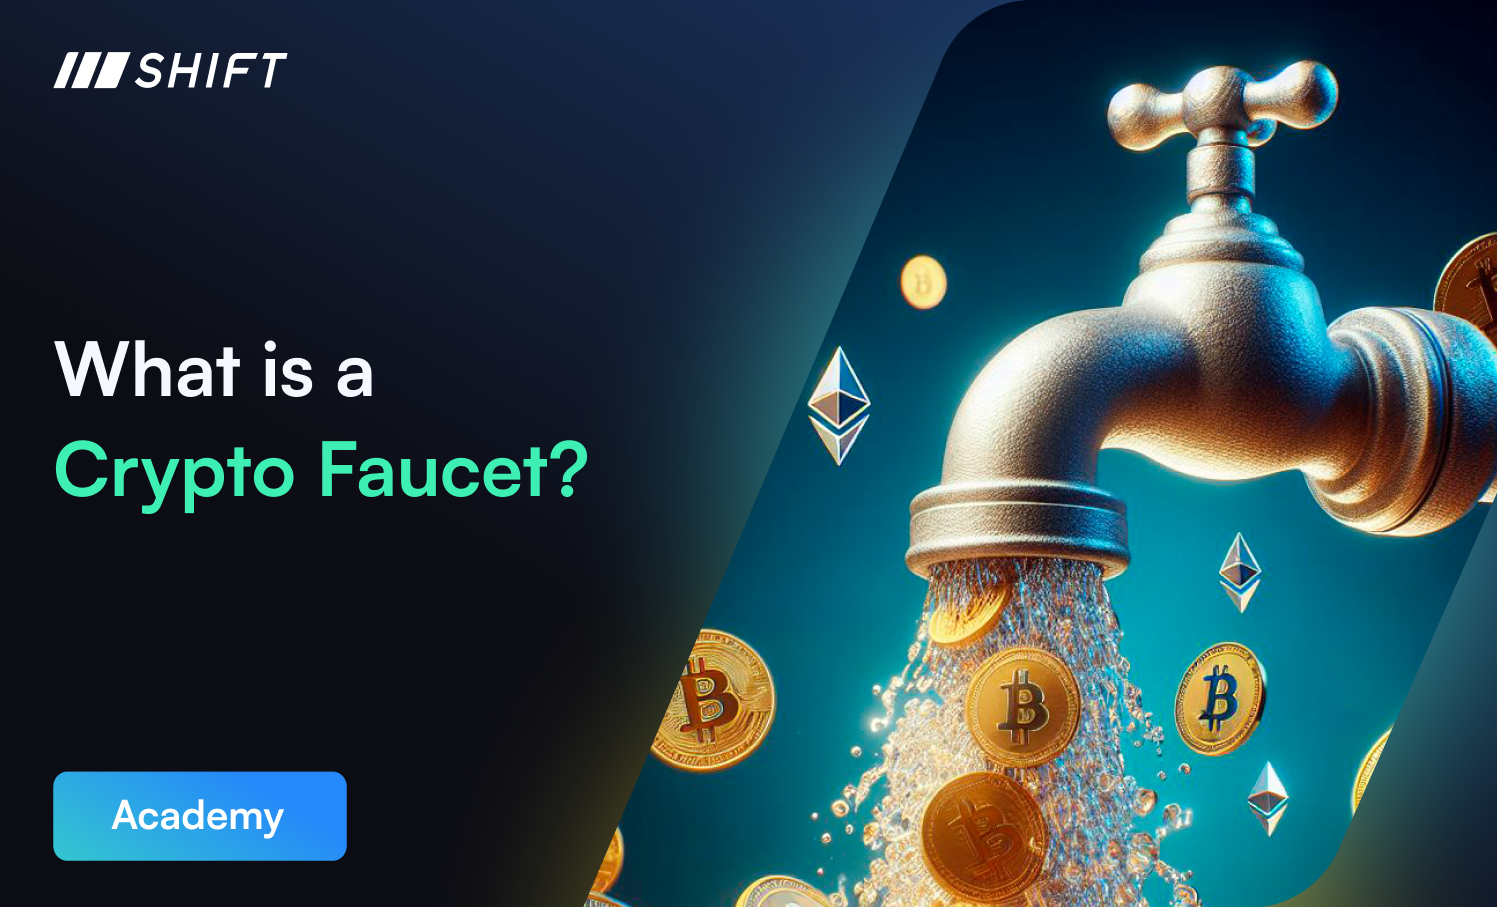 Have you ever wondered how a crypto faucet works? It rewards users for completing tasks and activities.